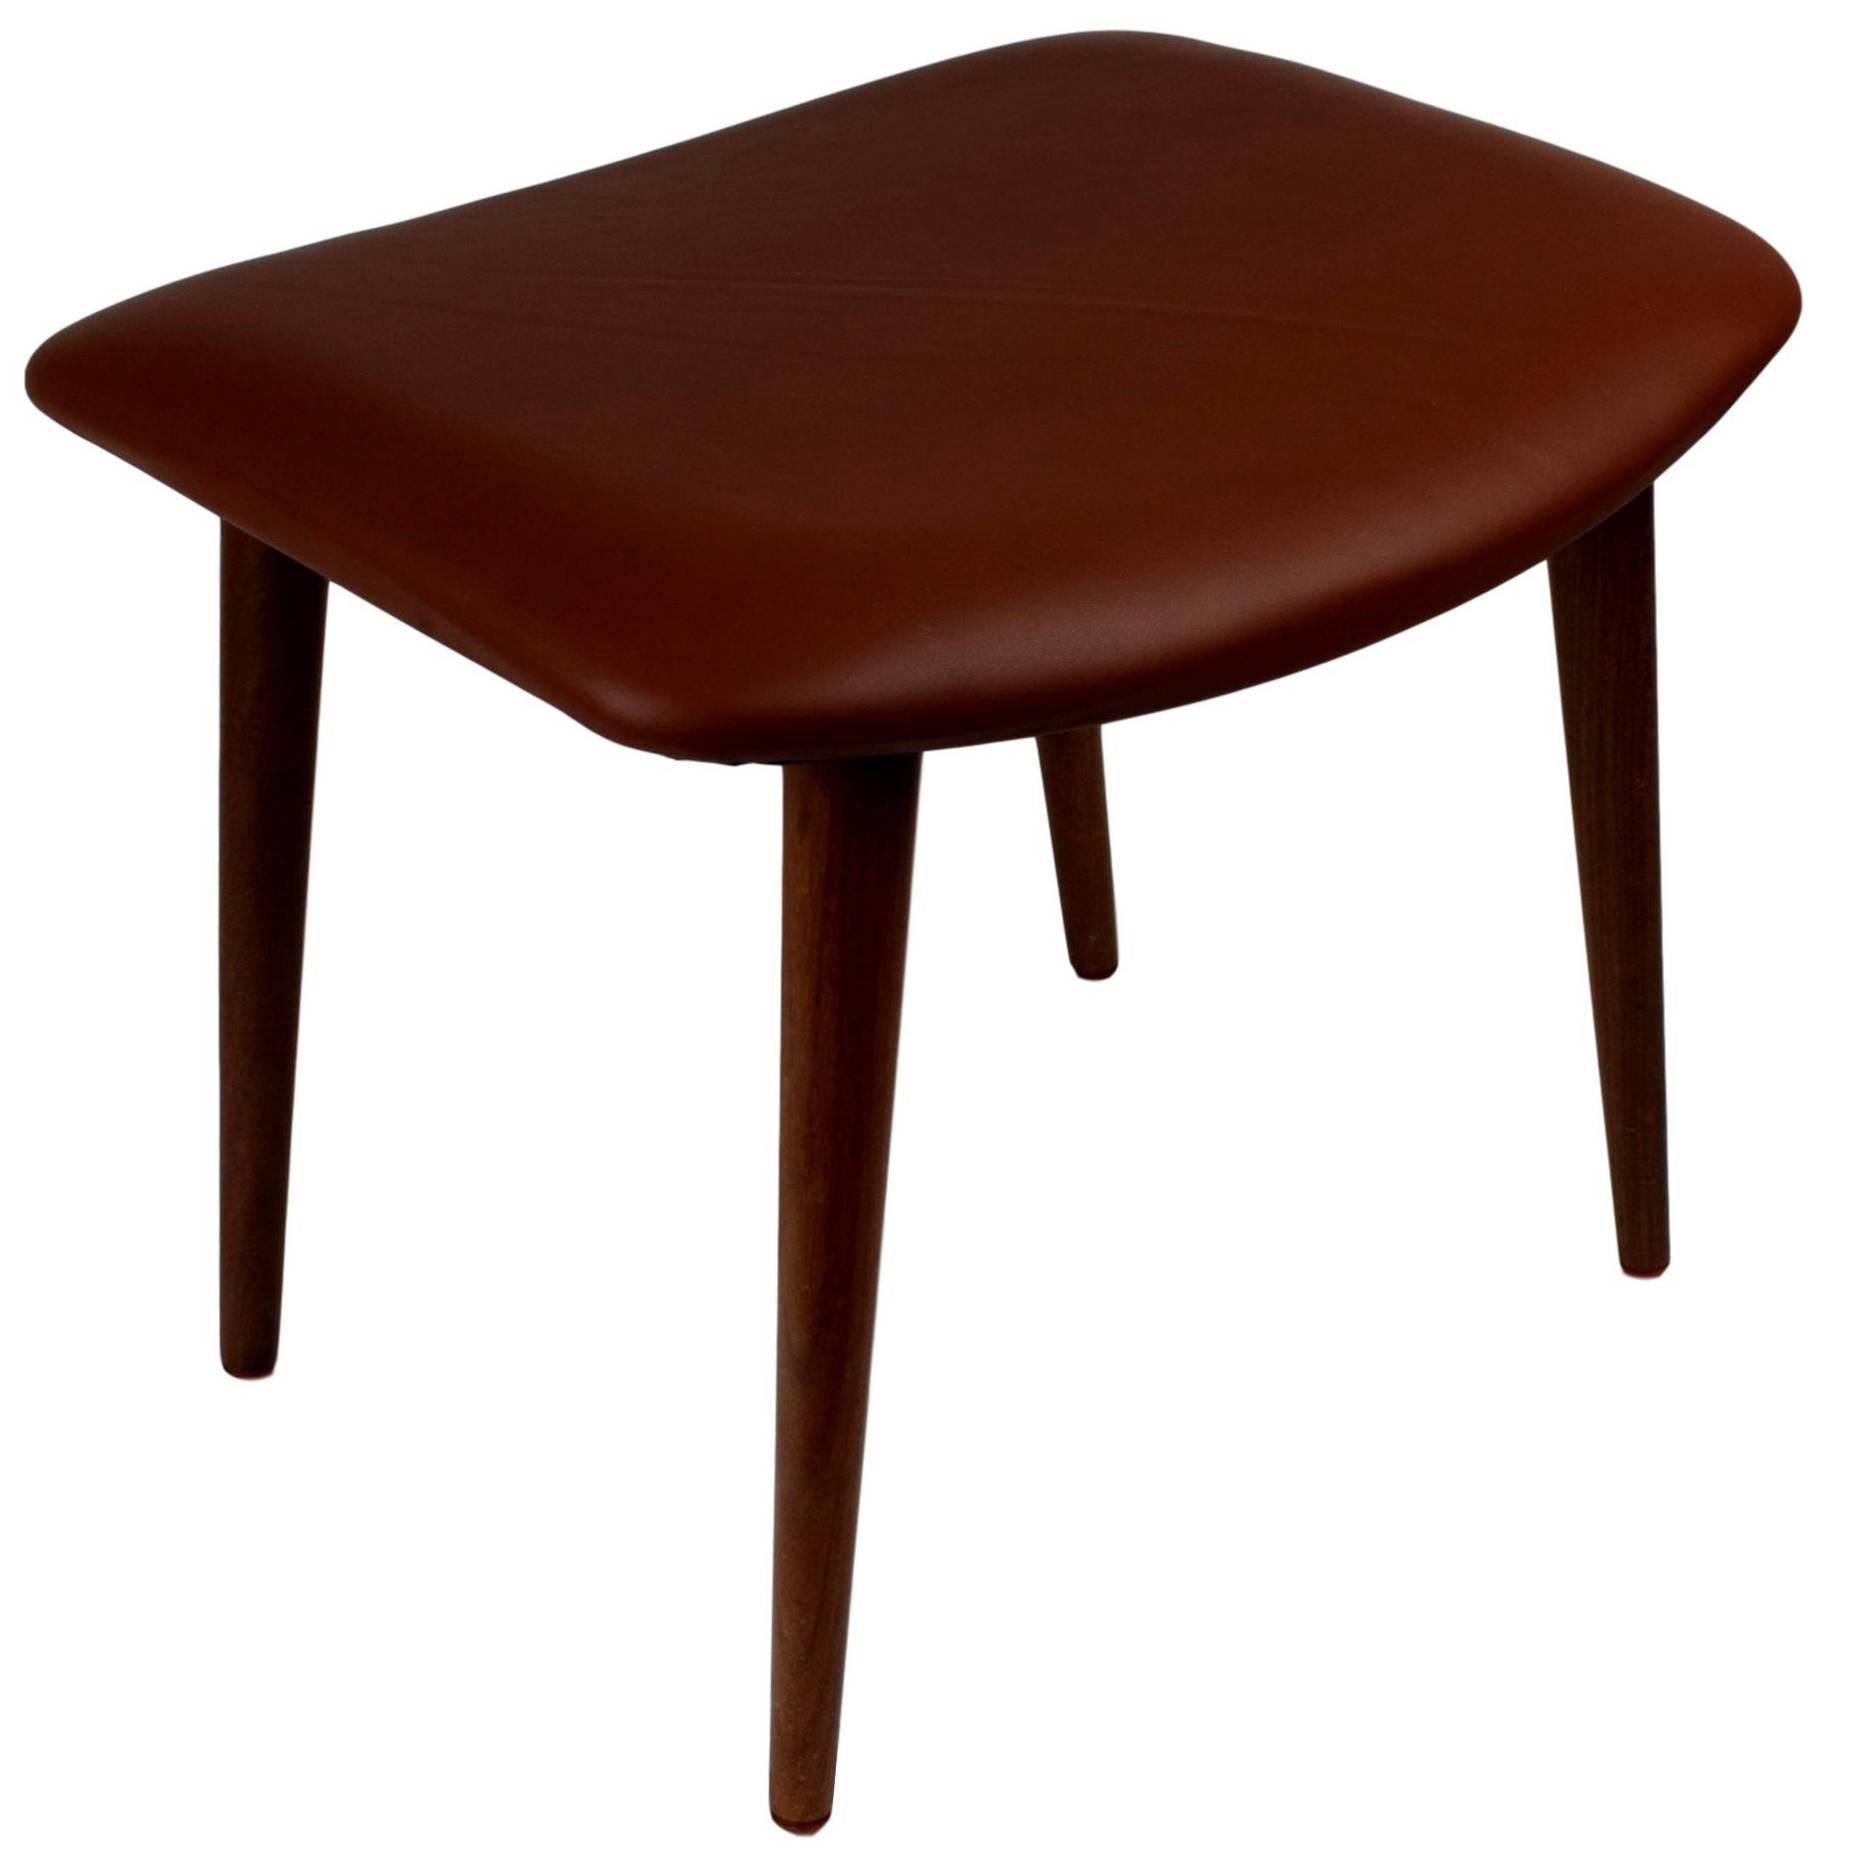 Danish Midcentury Teak Ottoman Upholstered with Brown Aniline Leather For Sale